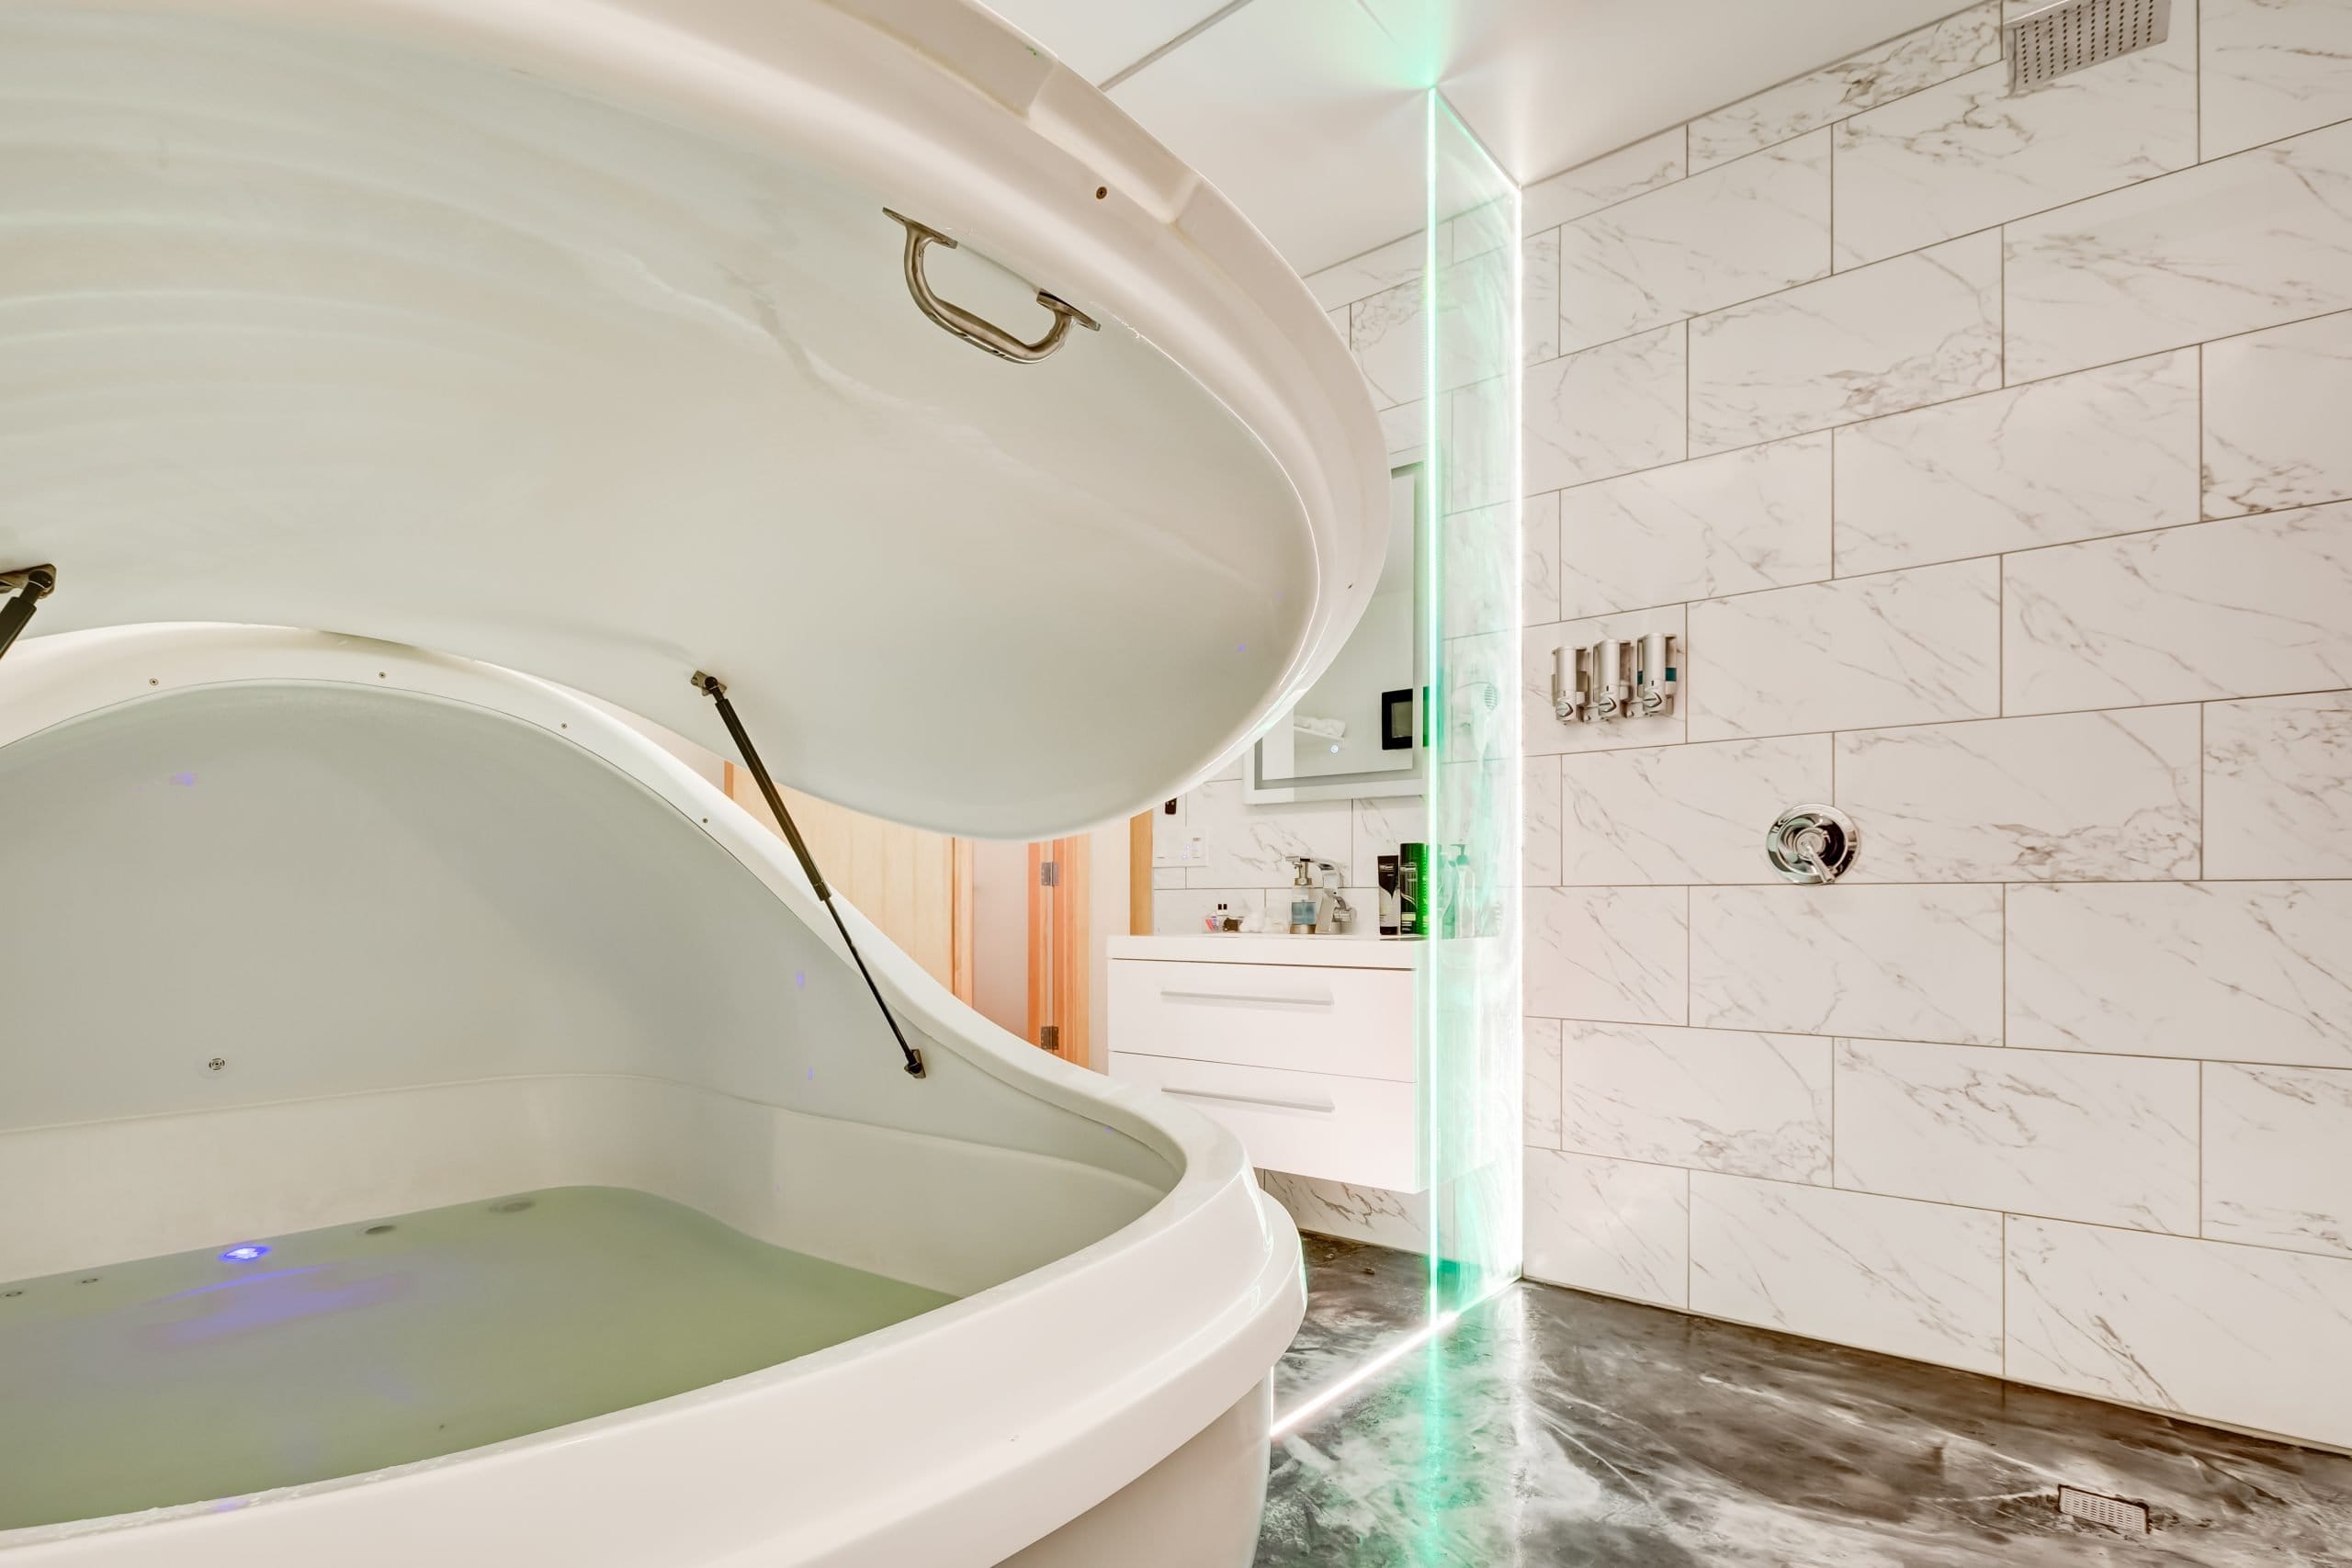 Floatation therapy center in denver, co